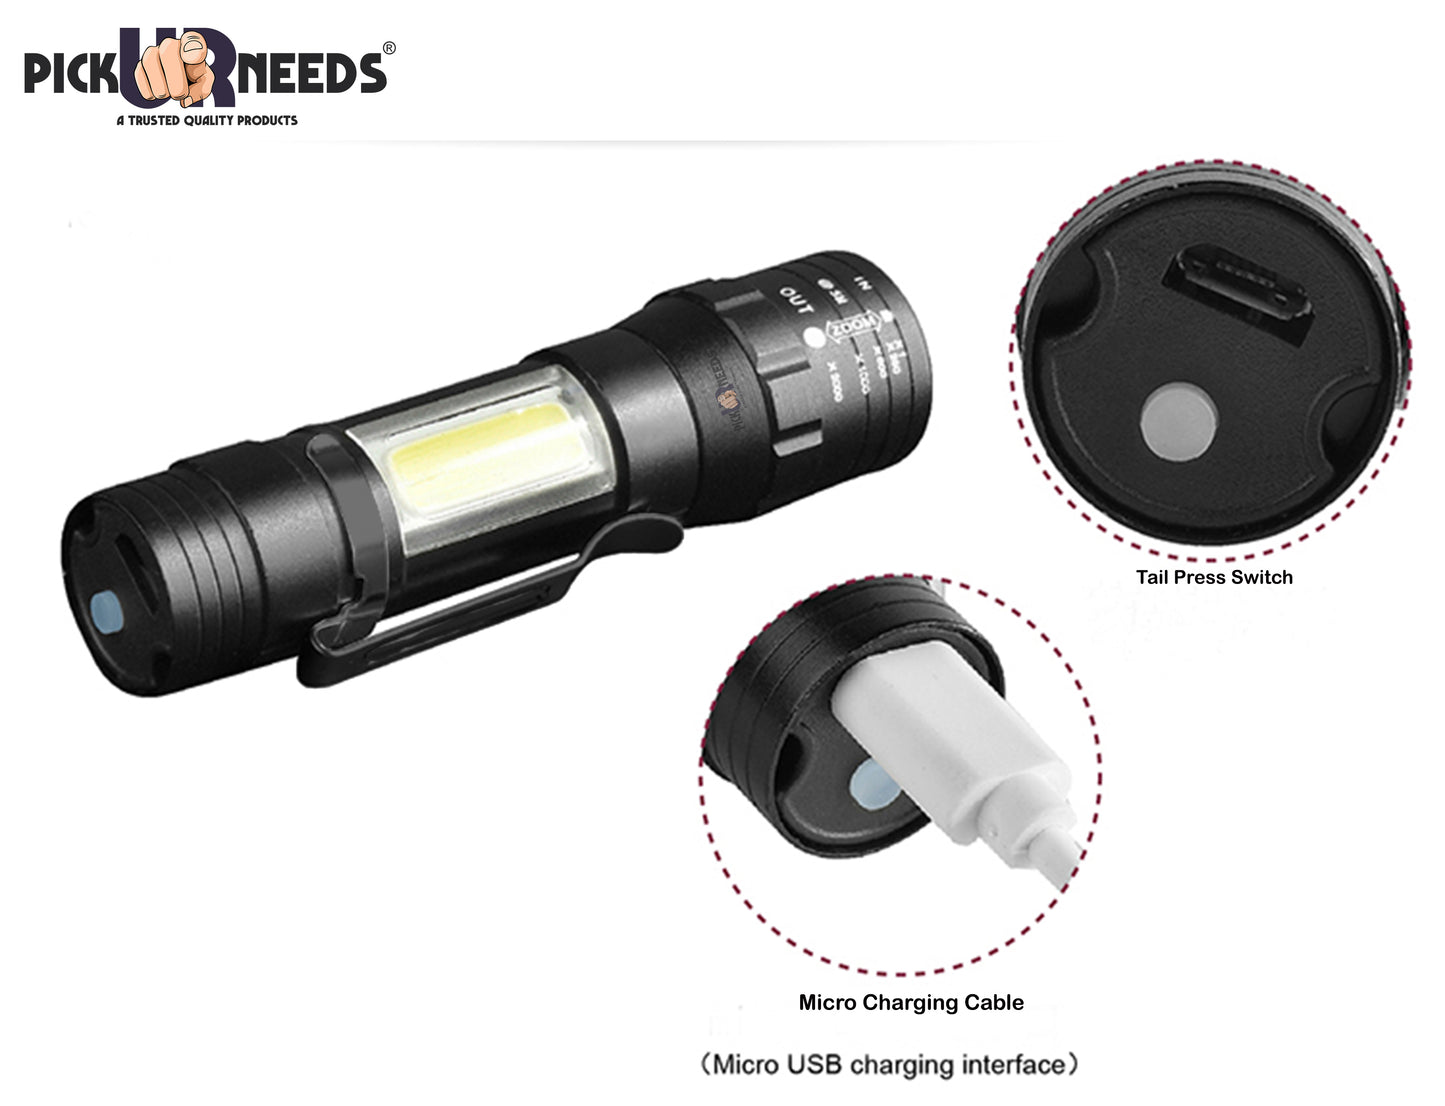 Pick Ur Needs 3 Mode Rechargeable Mini Emergency Flashlight With LED+COB Zoomable Torch Light